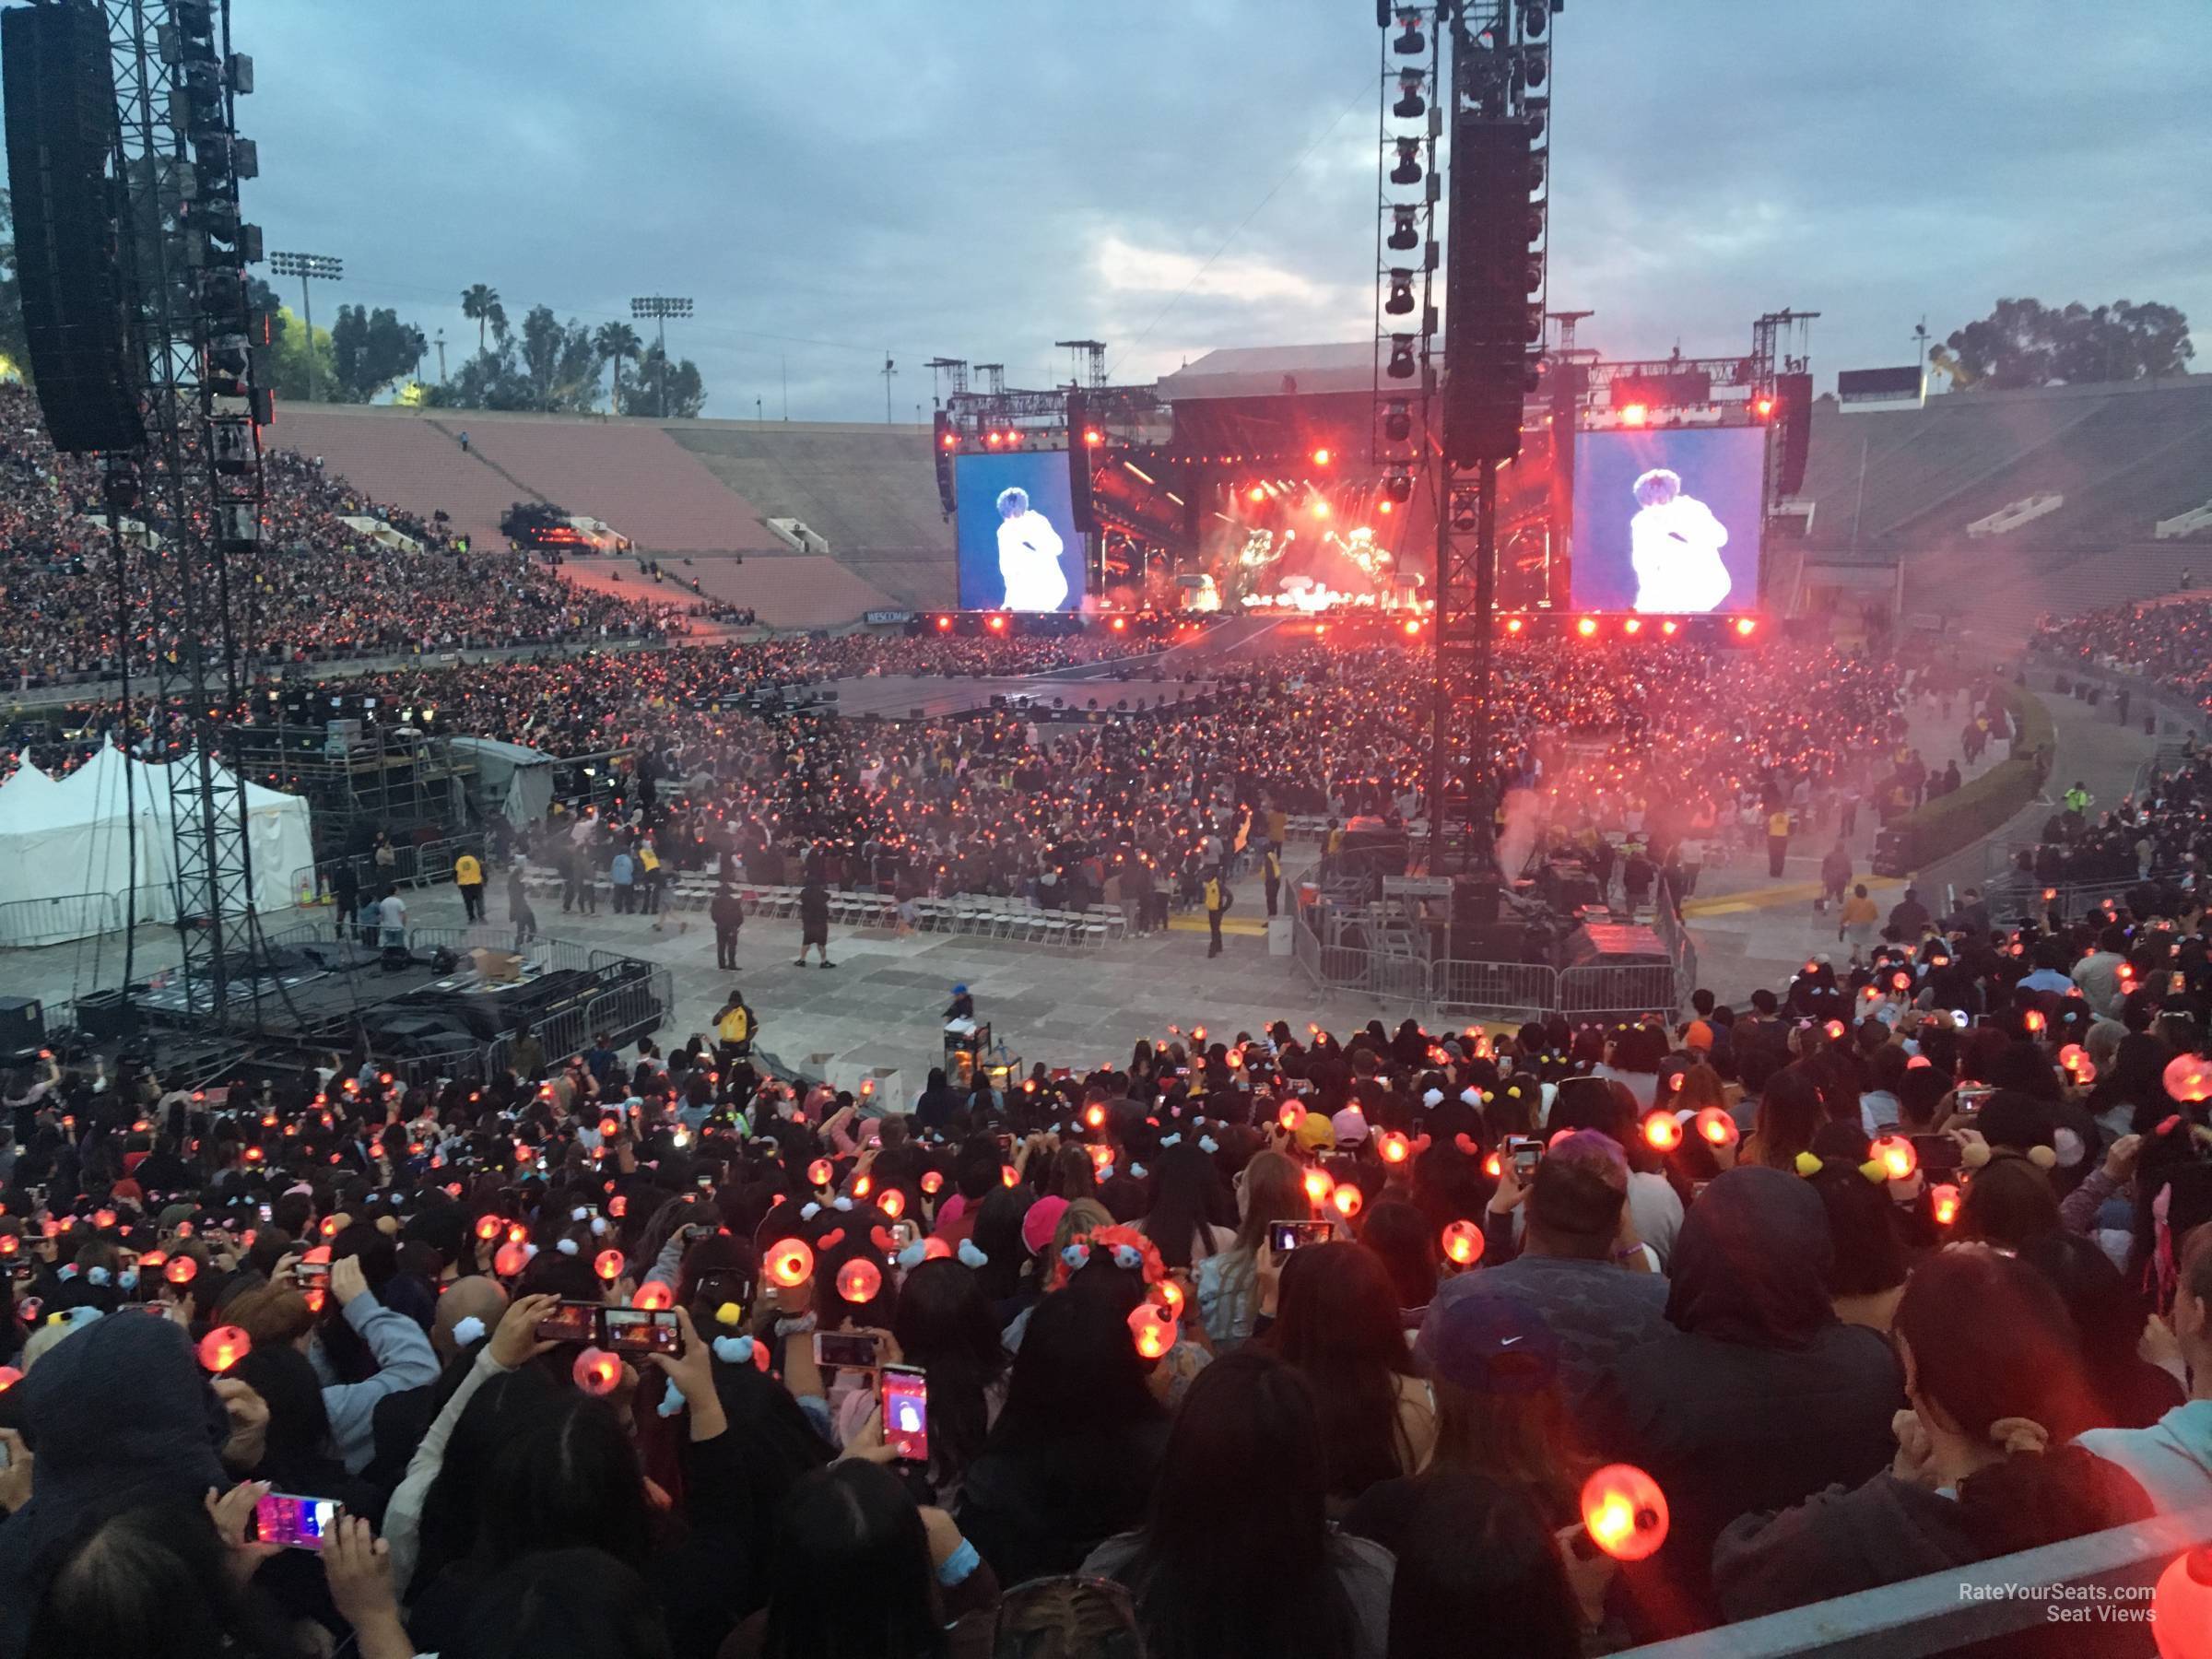 section 14, row 30 seat view  for concert - rose bowl stadium